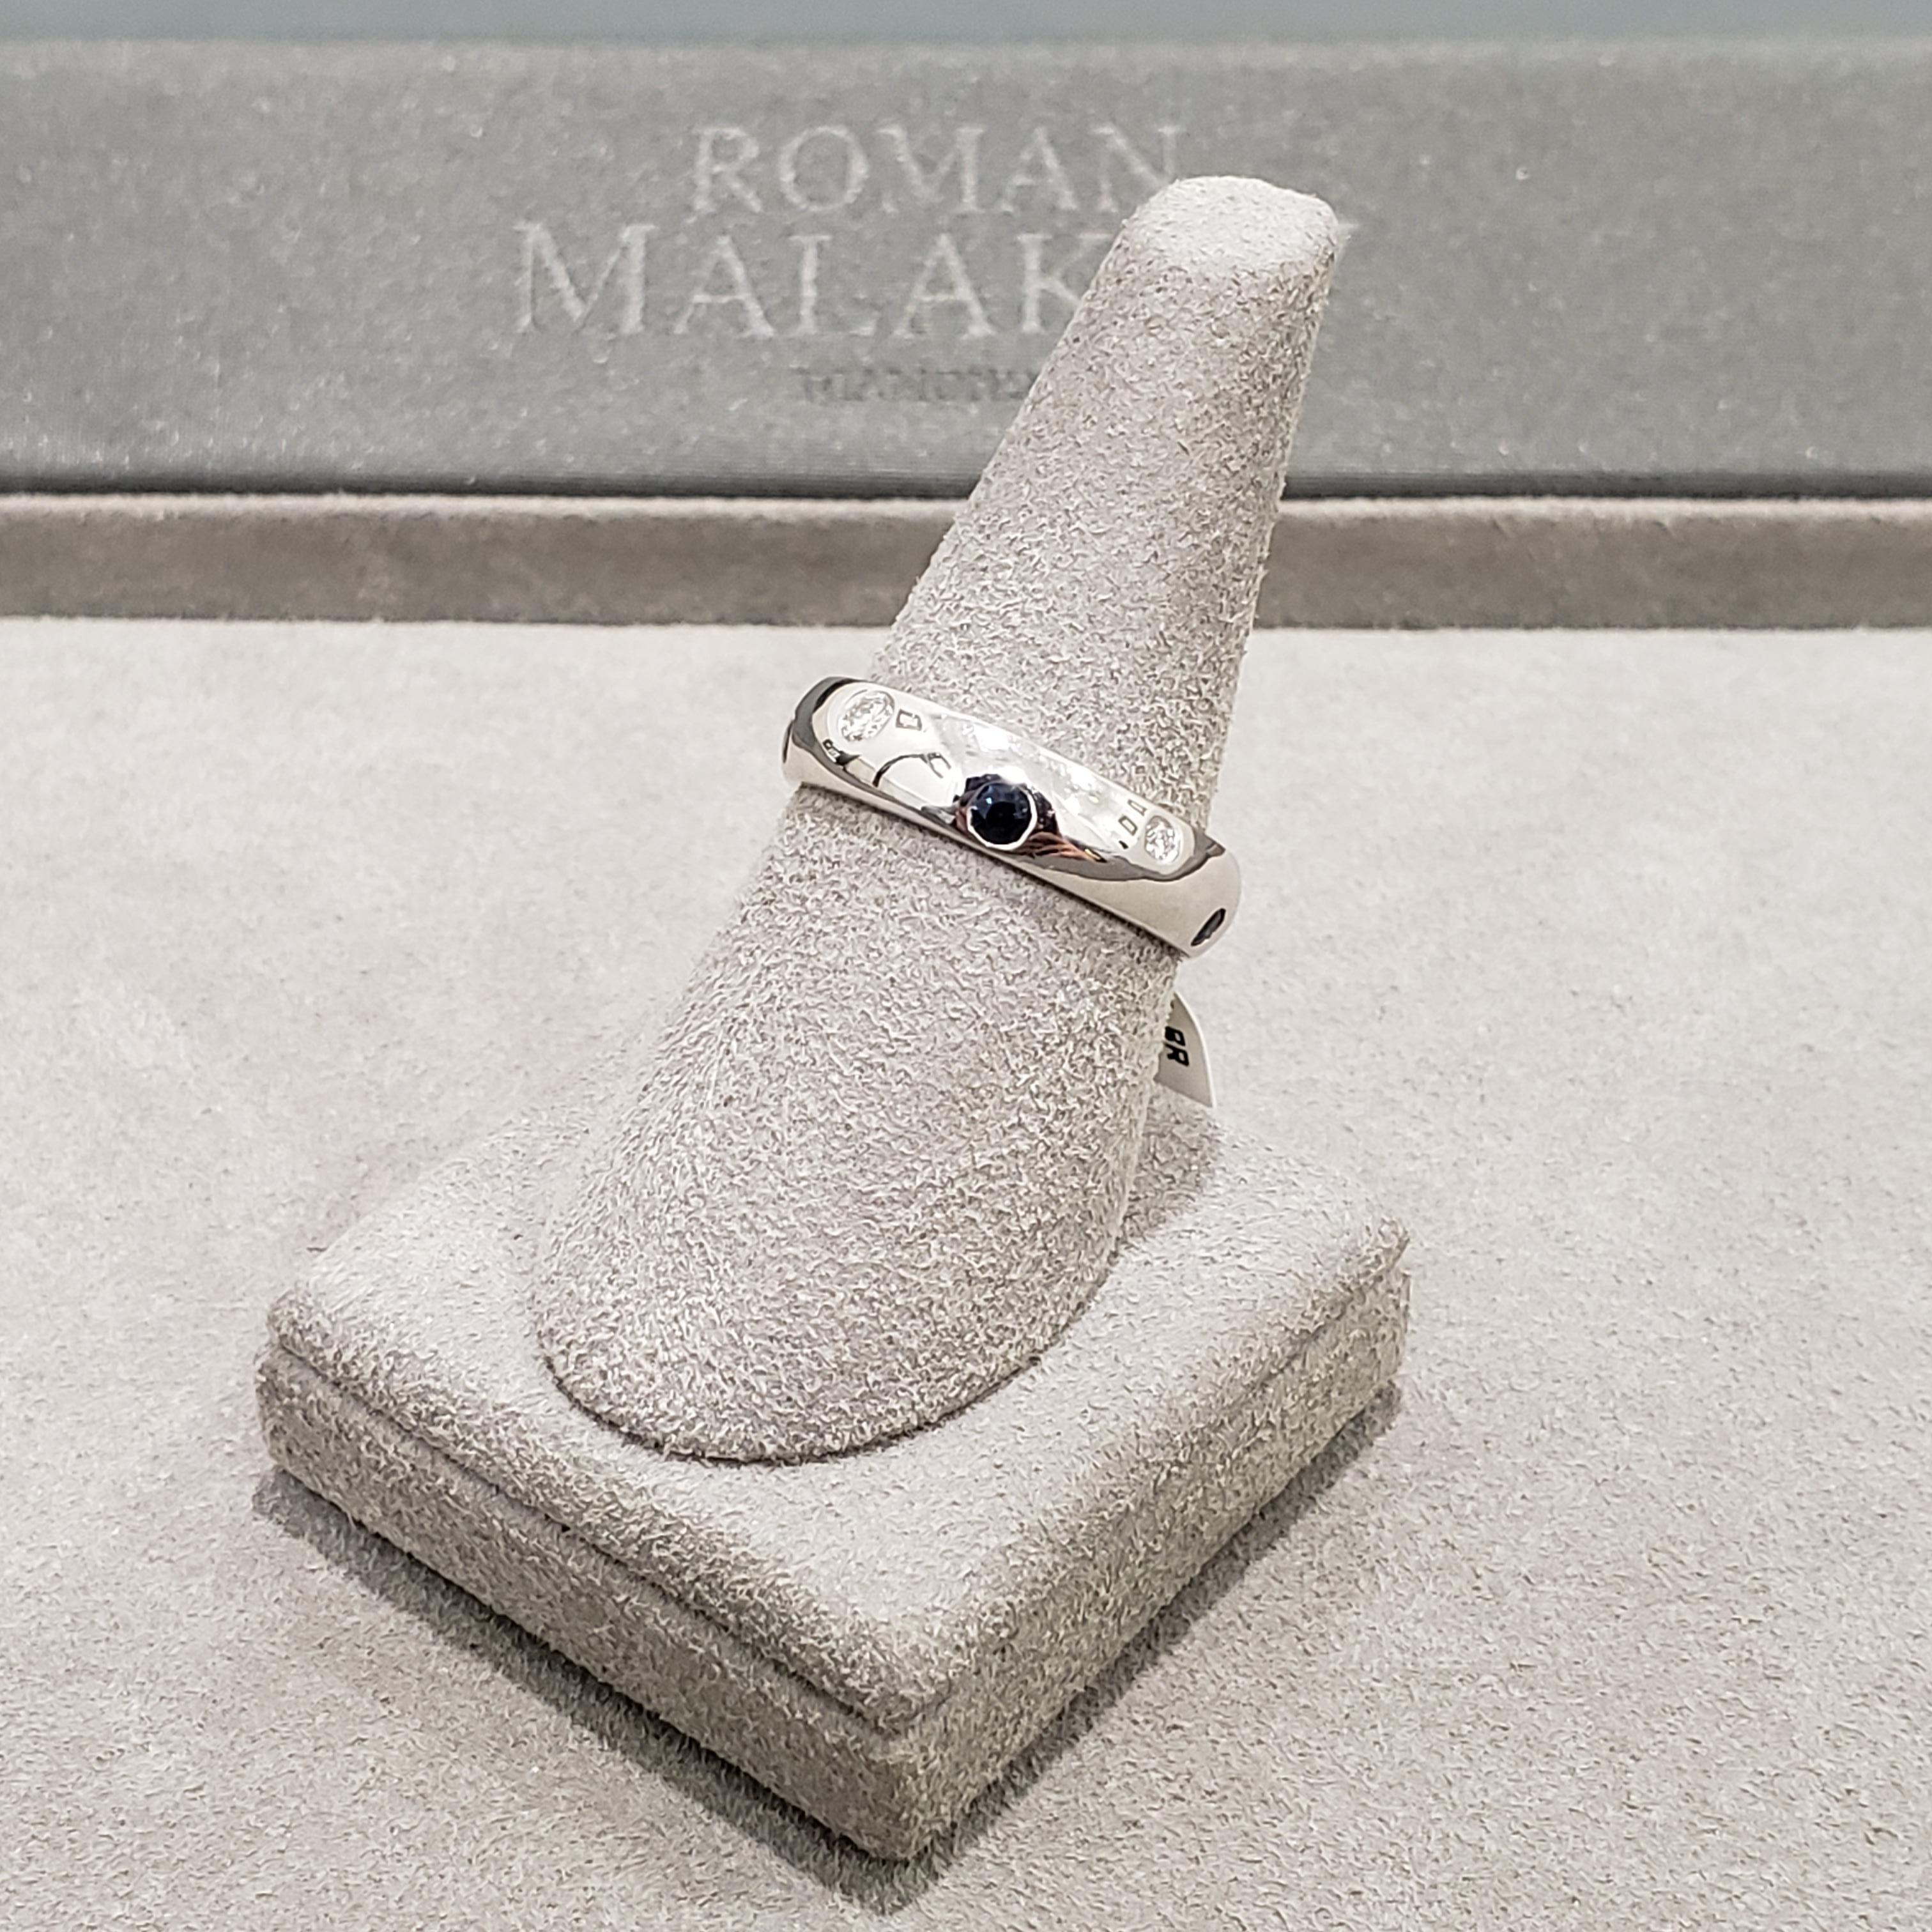 Showcasing a mix of round diamonds and blue sapphires, set flushed in a staggered and rounded Etoile design. The diamonds weigh 0.21 carats total and the sapphires weigh 0.23 carats total. Made in 18 karat white gold. Size 6.75 US.

Roman Malakov is